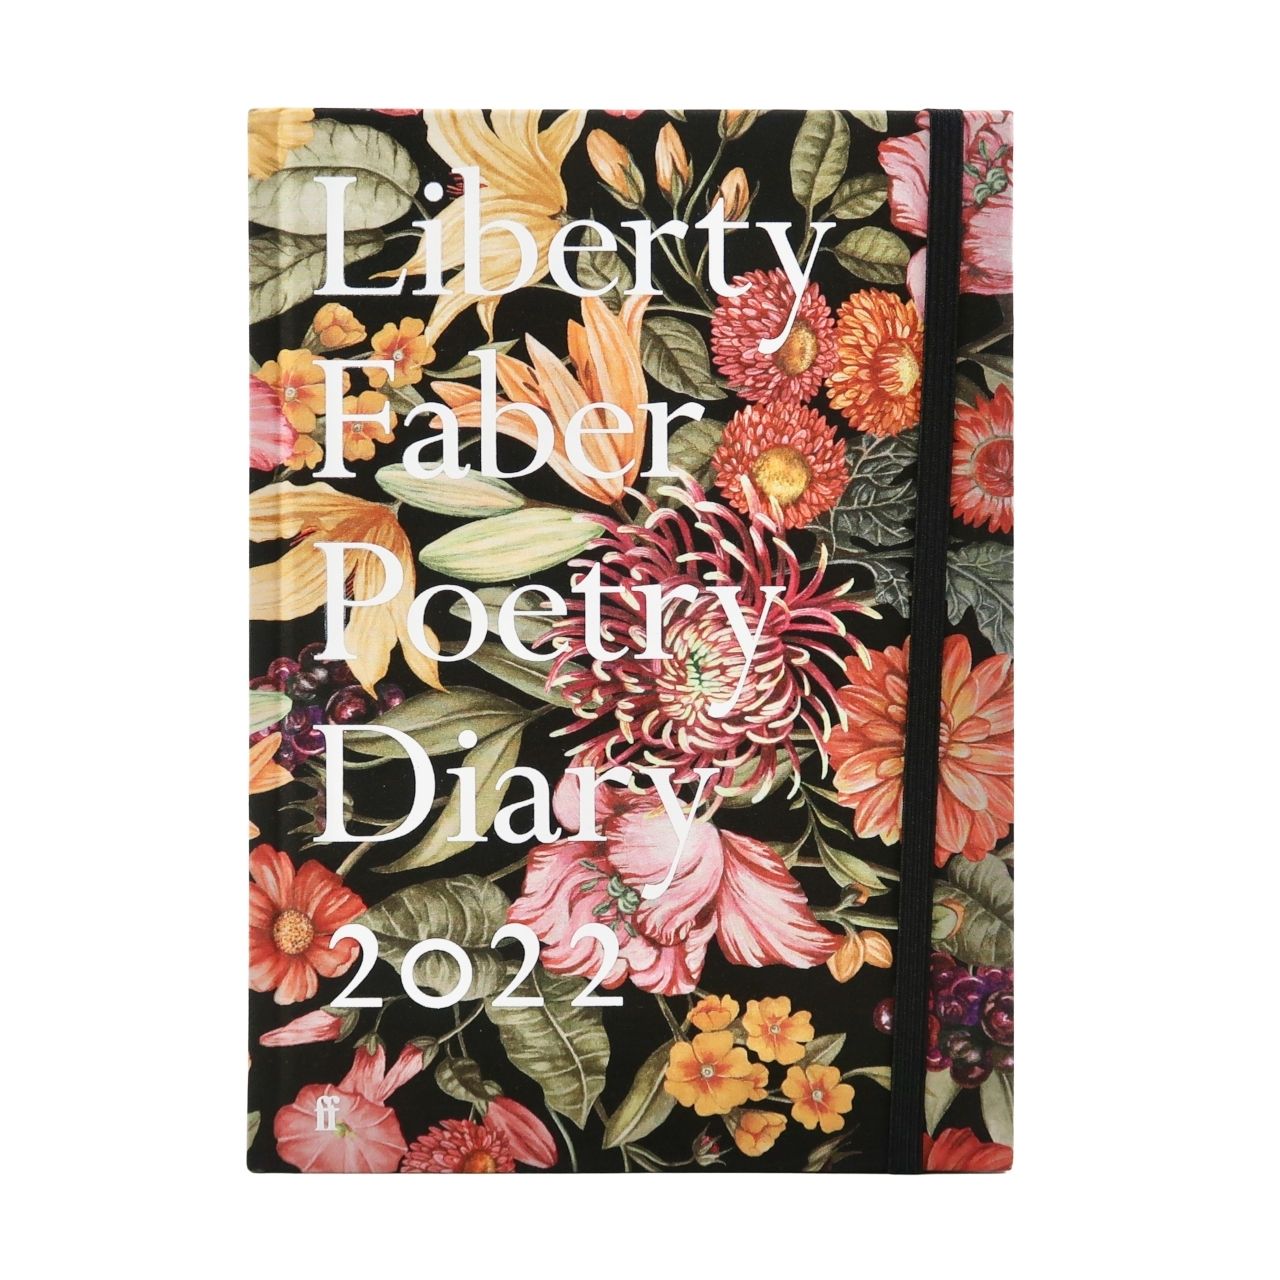 Faber & Faber Liberty Faber Poetry Diary 2022